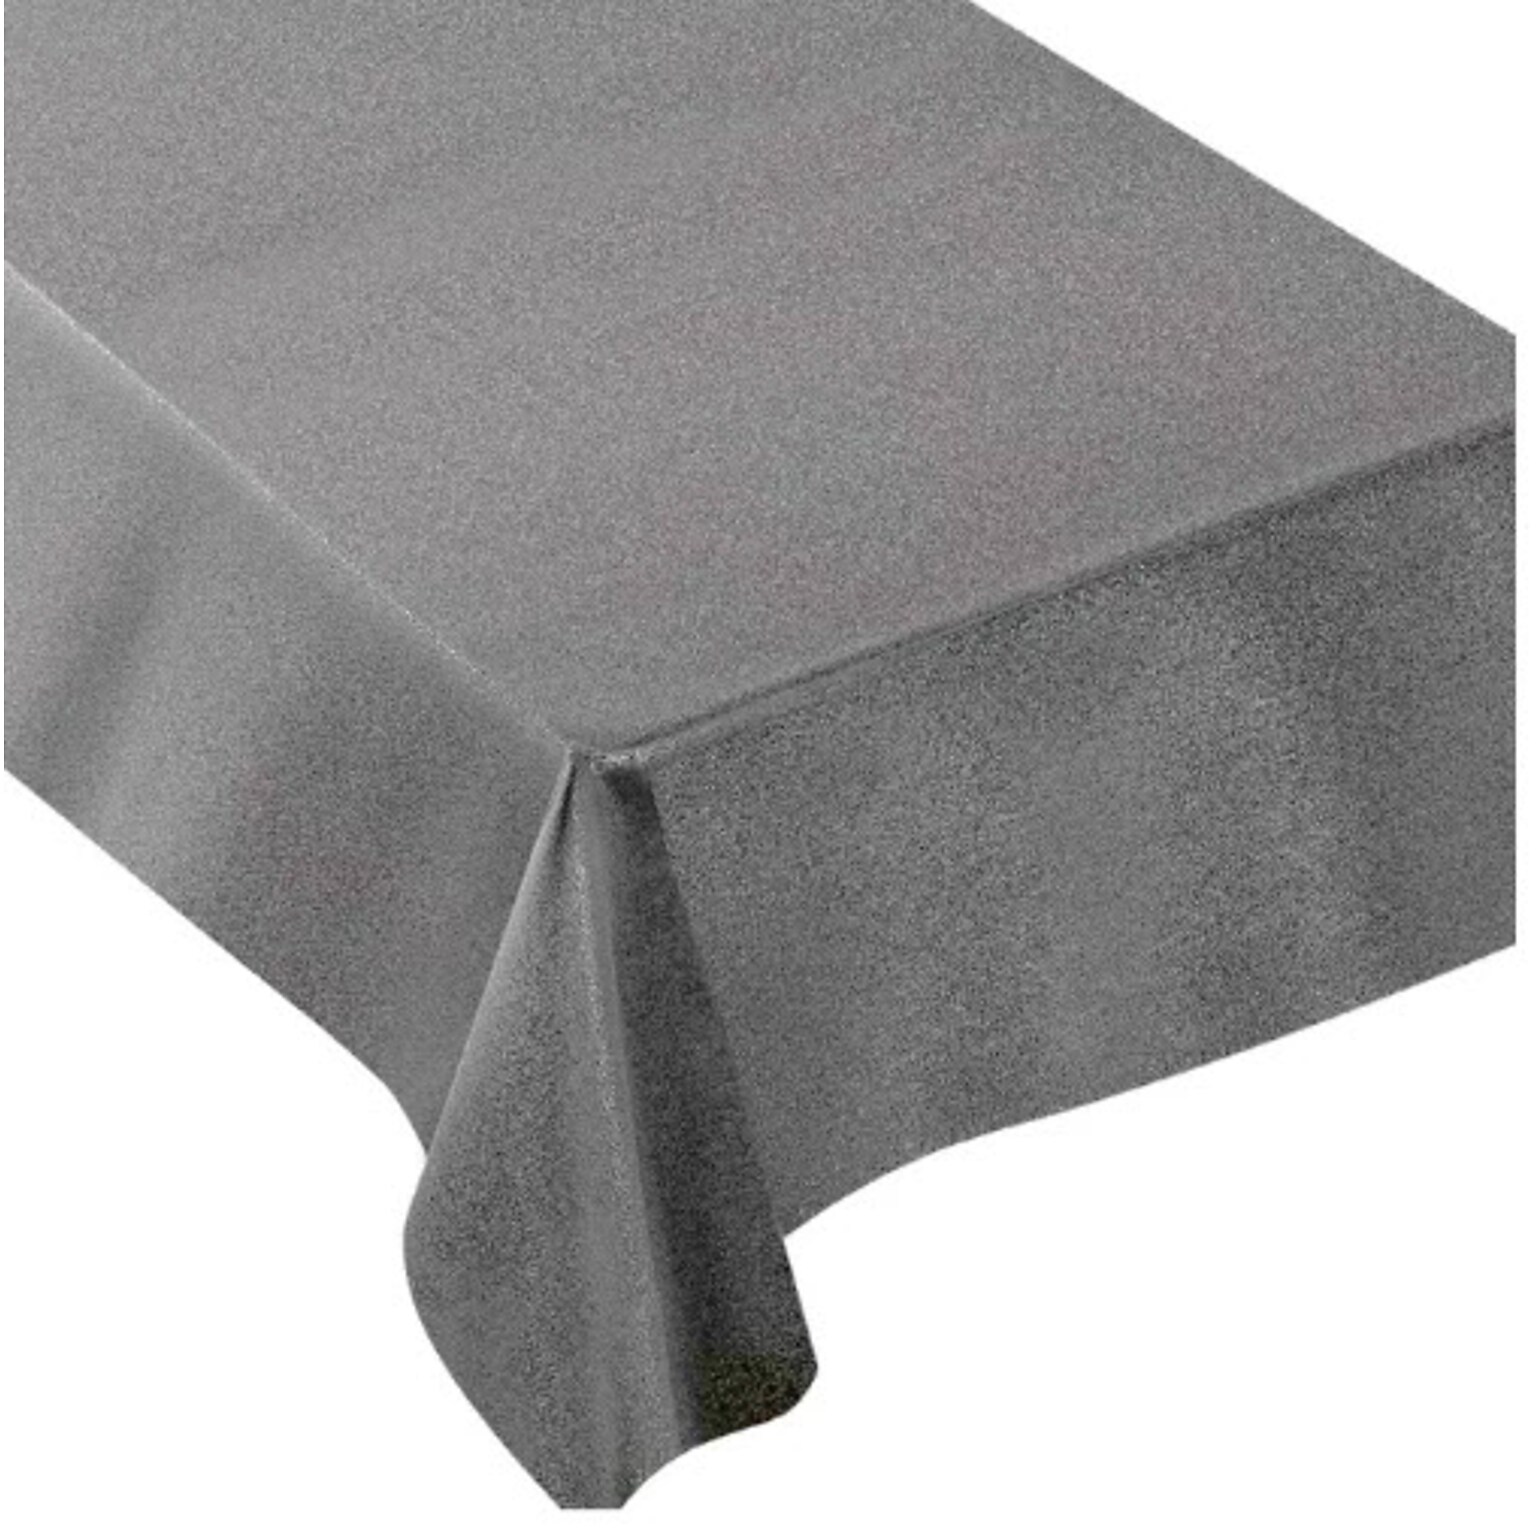 JAM PAPER Premium Shimmer Fabric Tablecloth, Long Rectangle 60 x 104 inch, Metallic Pewter Grey, 1 Reusable Table Cover/Pack